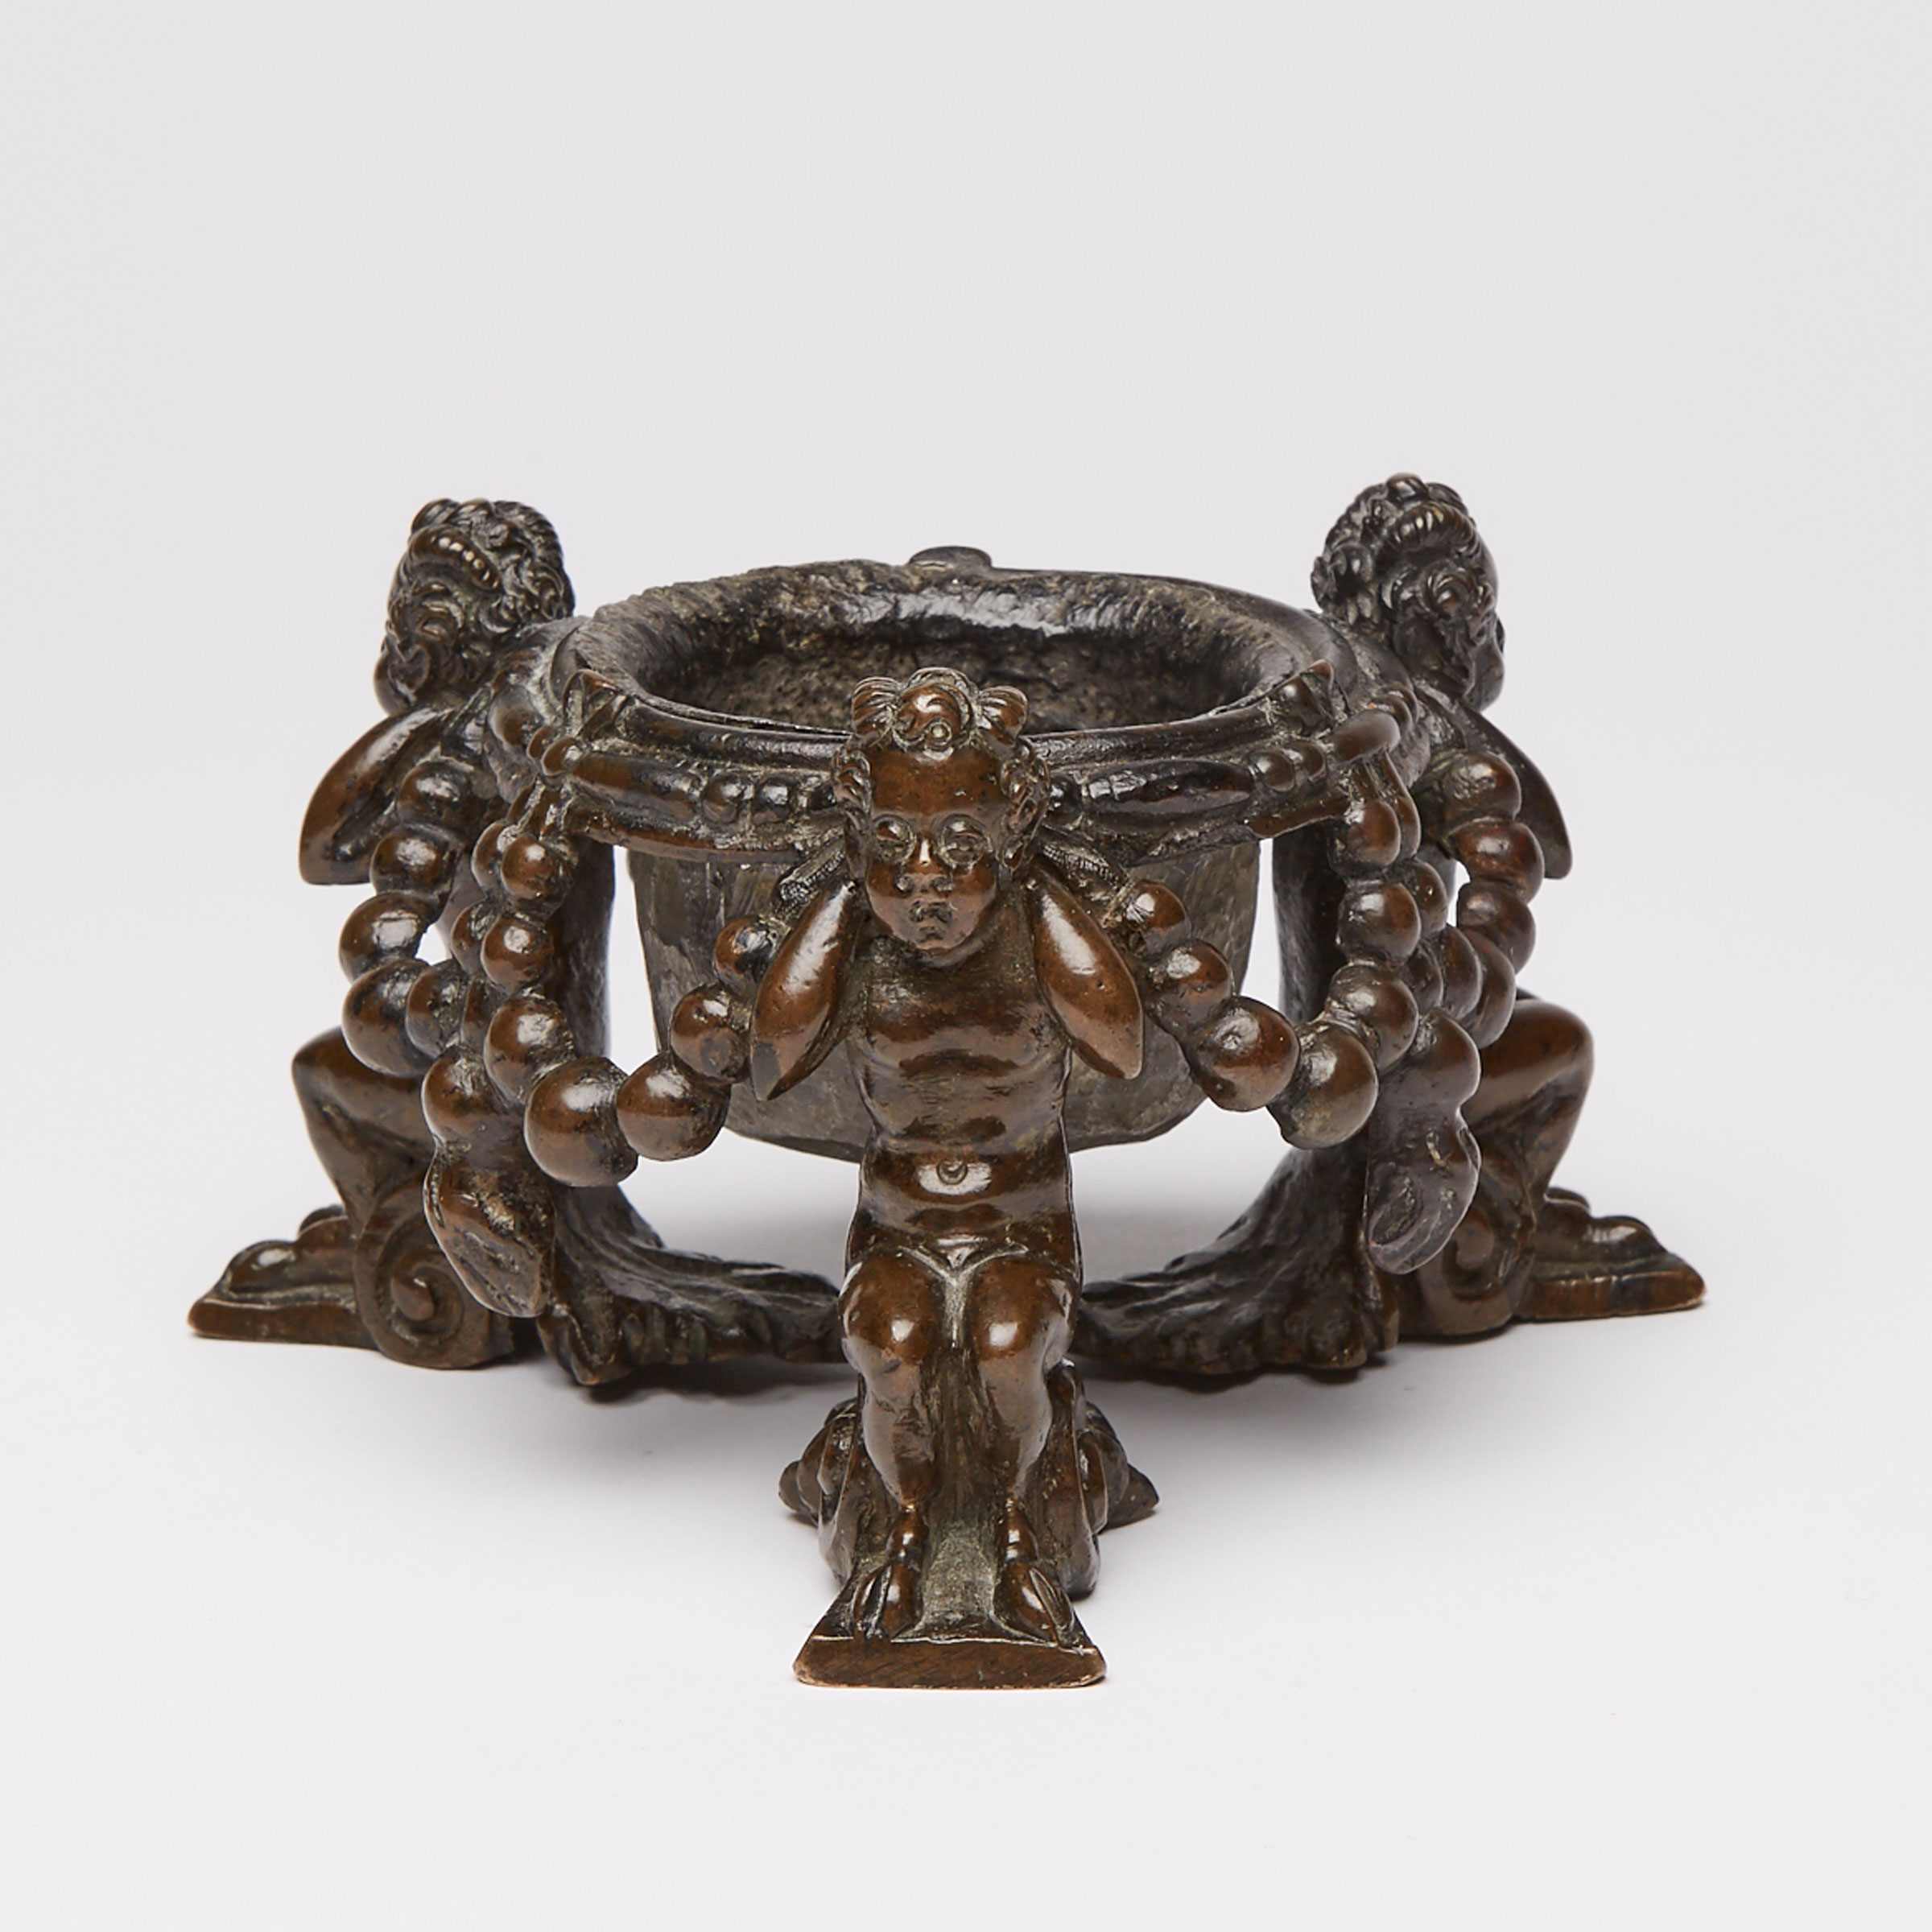 North Italian Bronze Ink Stand Attributed to the Workshop of Giuseppe de Levis, Verona, late 16th century